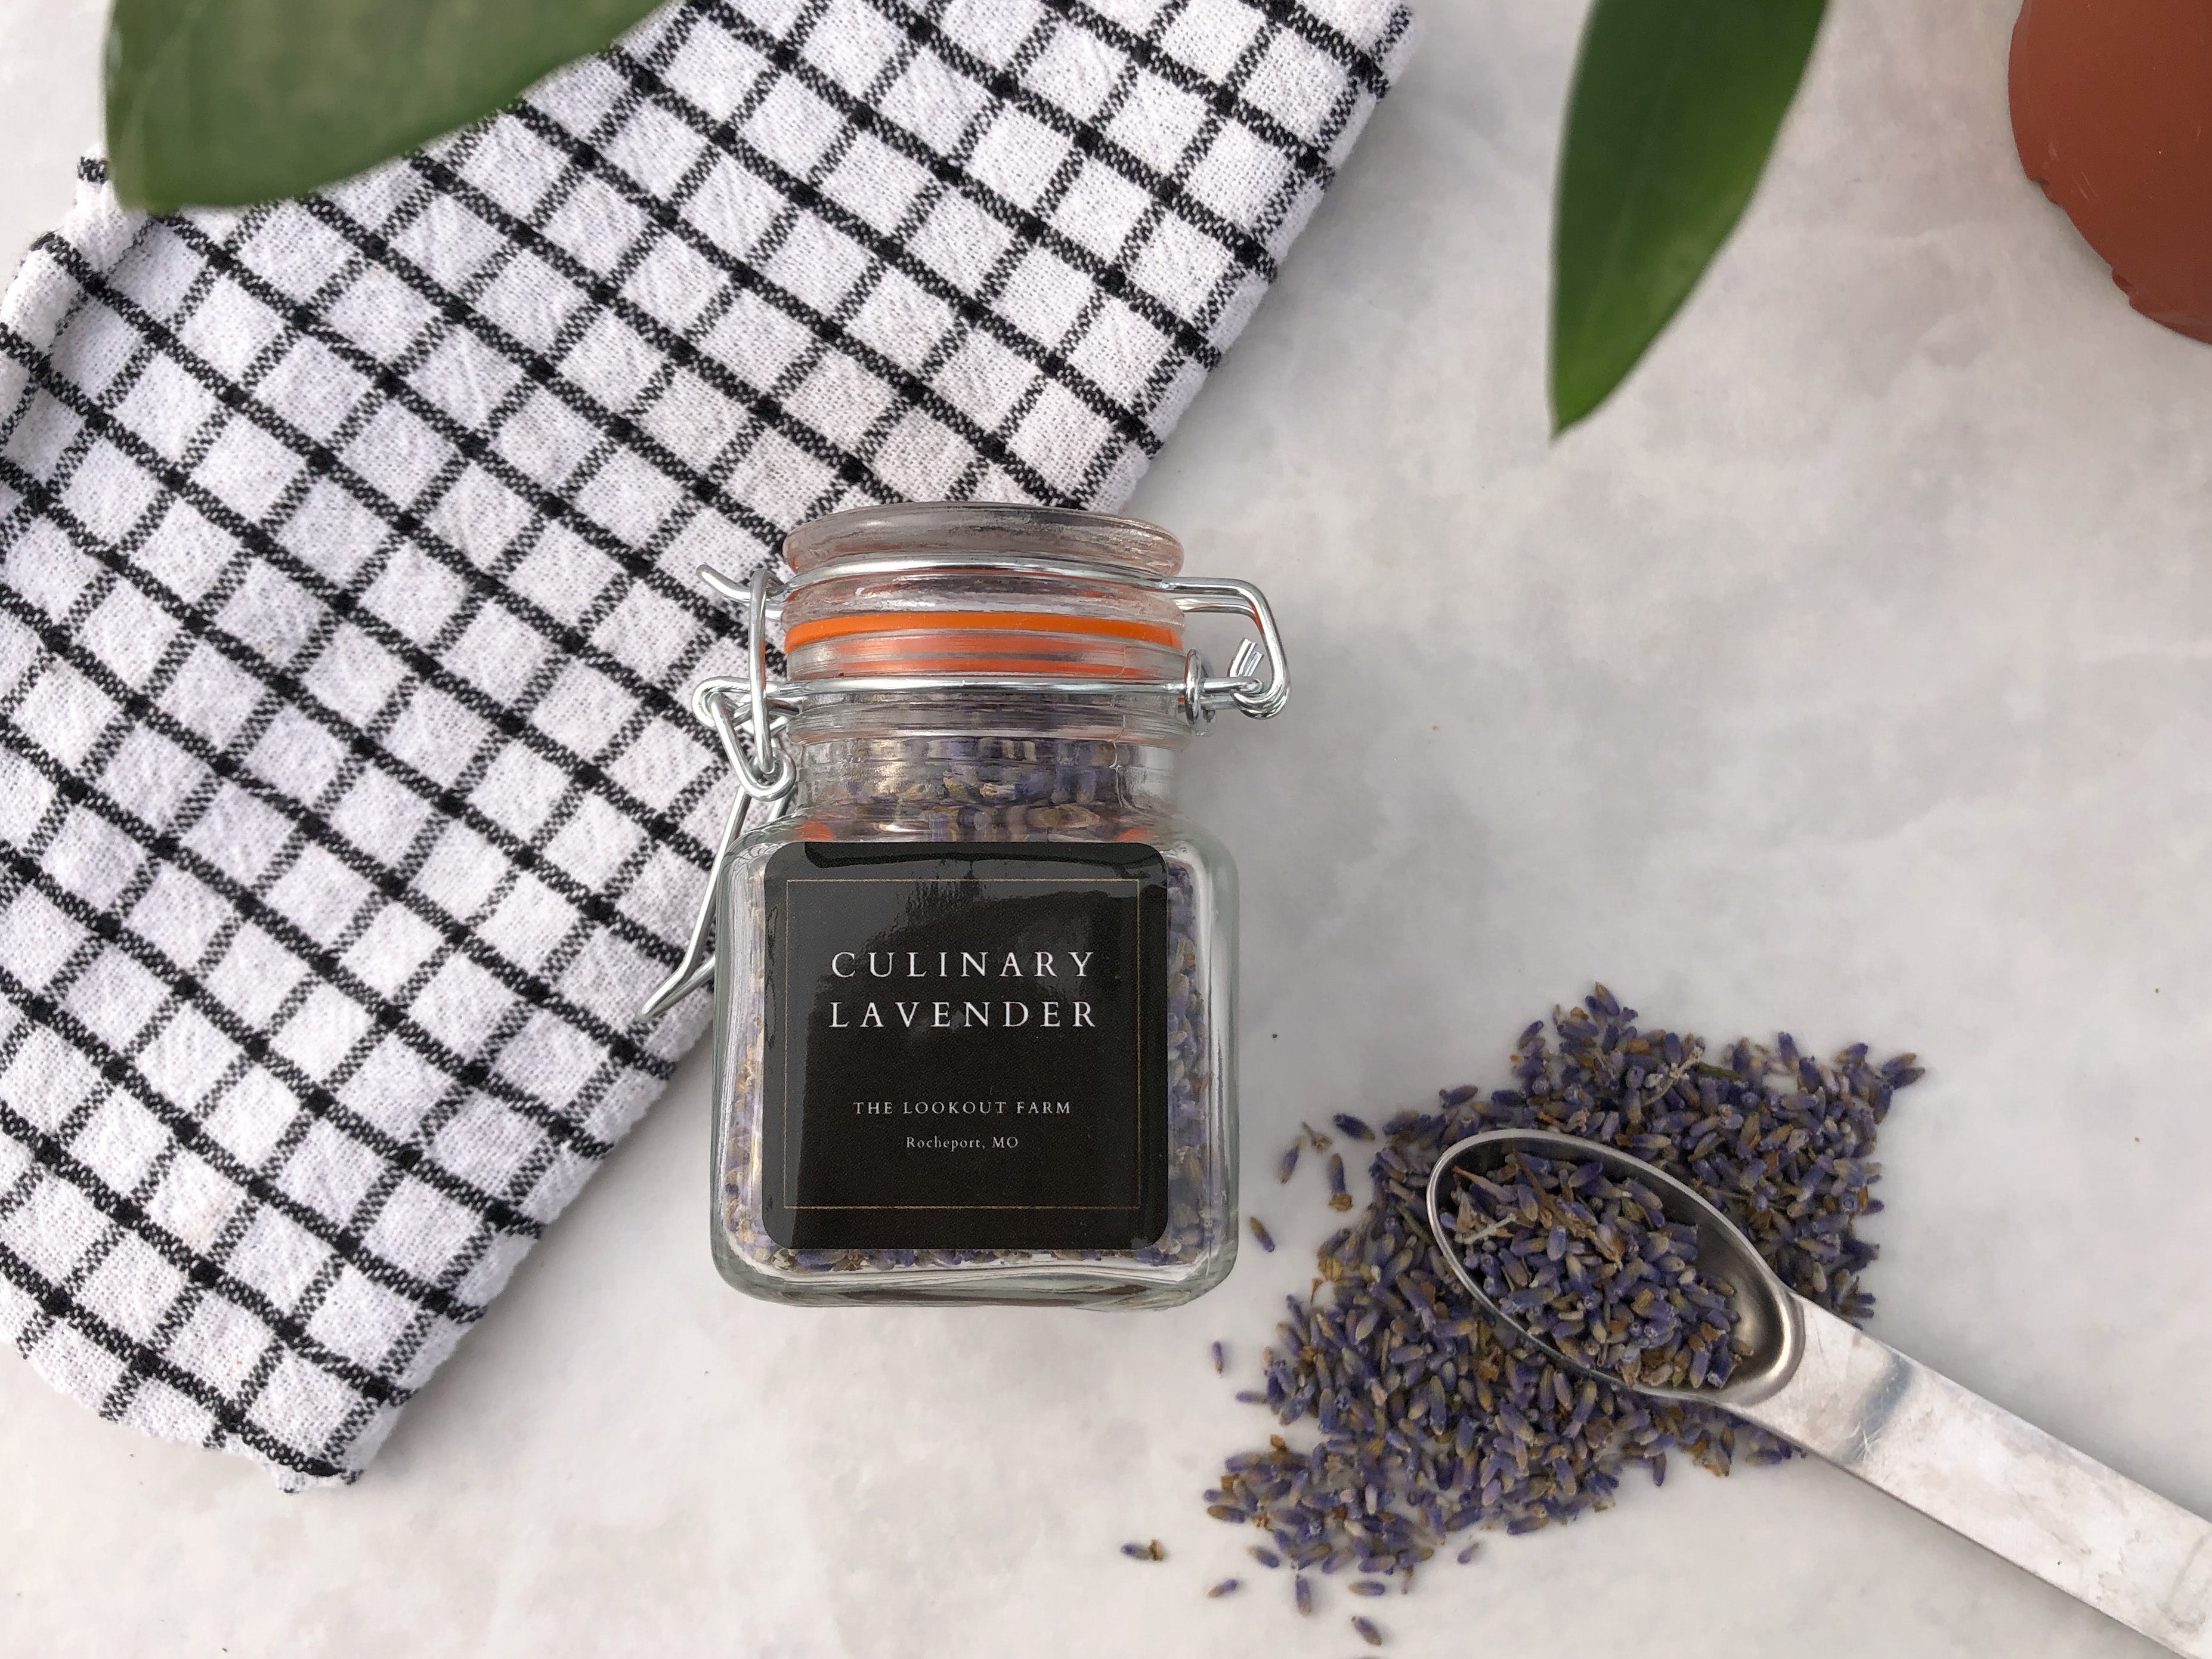 Culinary Lavender – The Lookout Farm